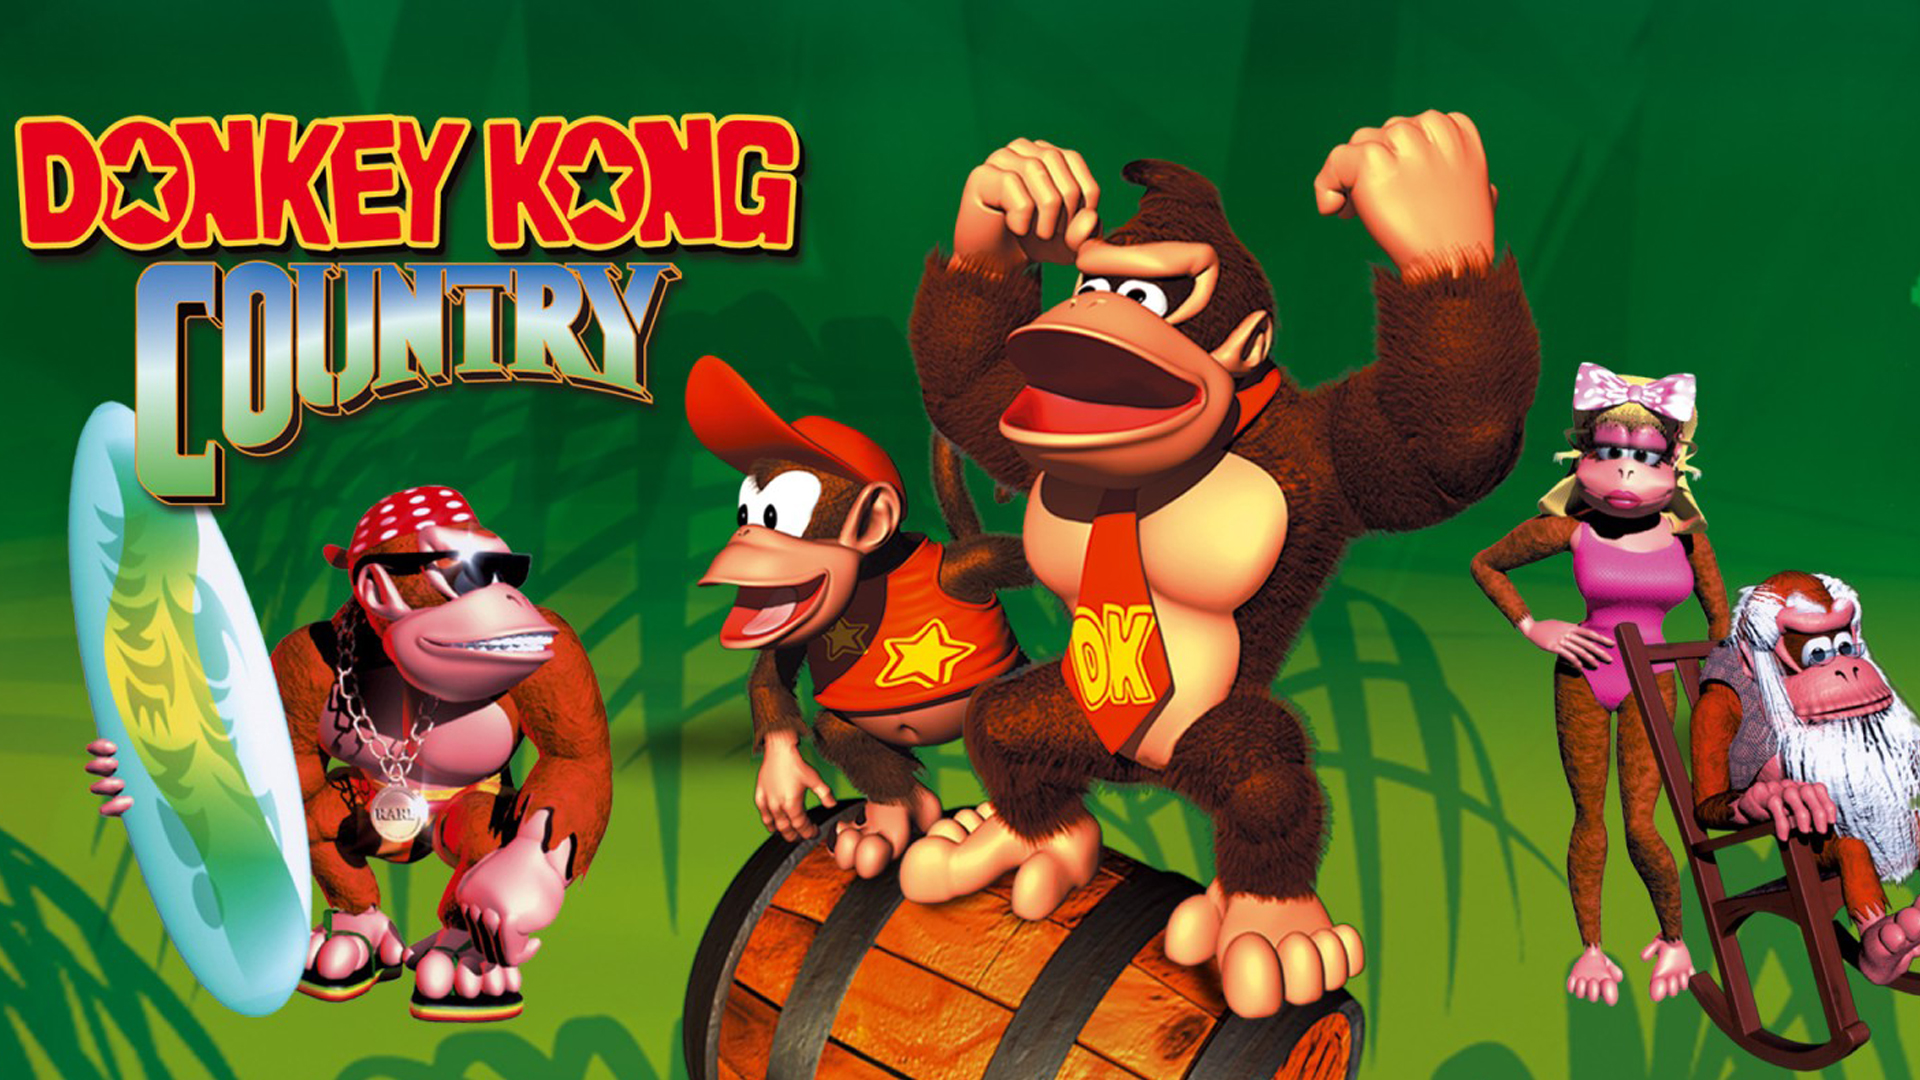 “Yes, we did go to the zoo and observe the gorillas”: The making of Donkey Kong Country